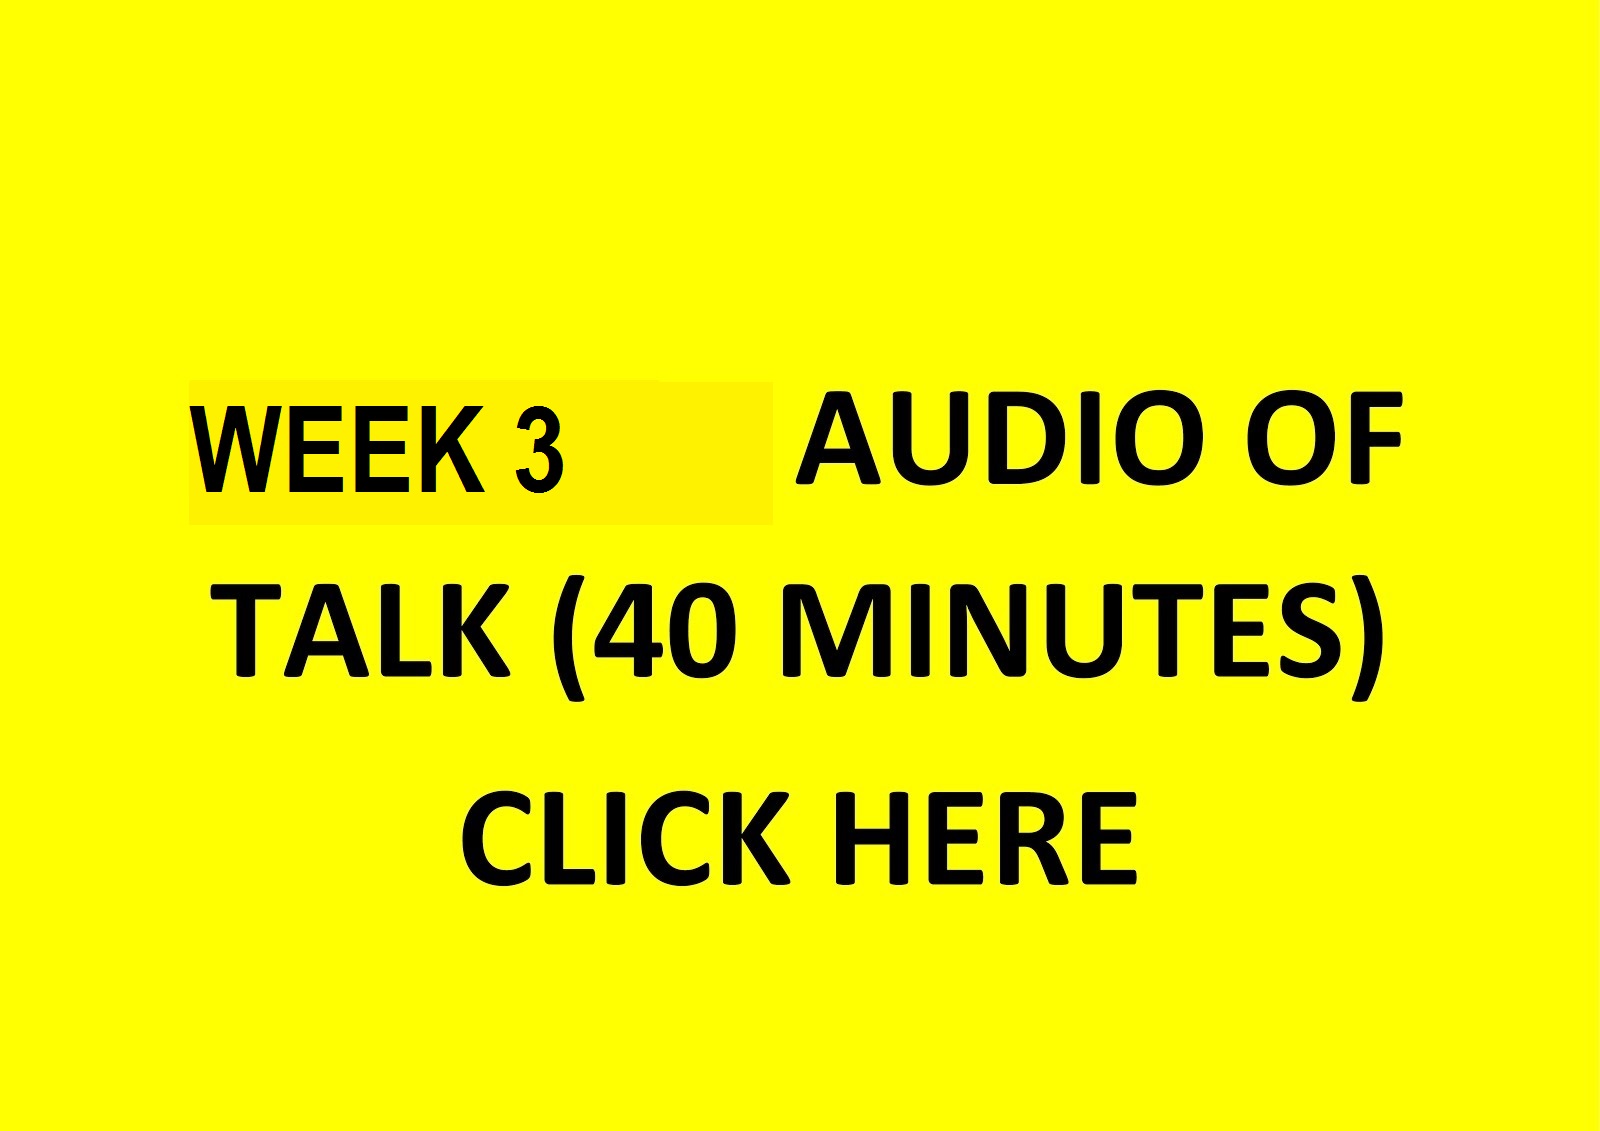 Week 3 Audio - click on picture to listen